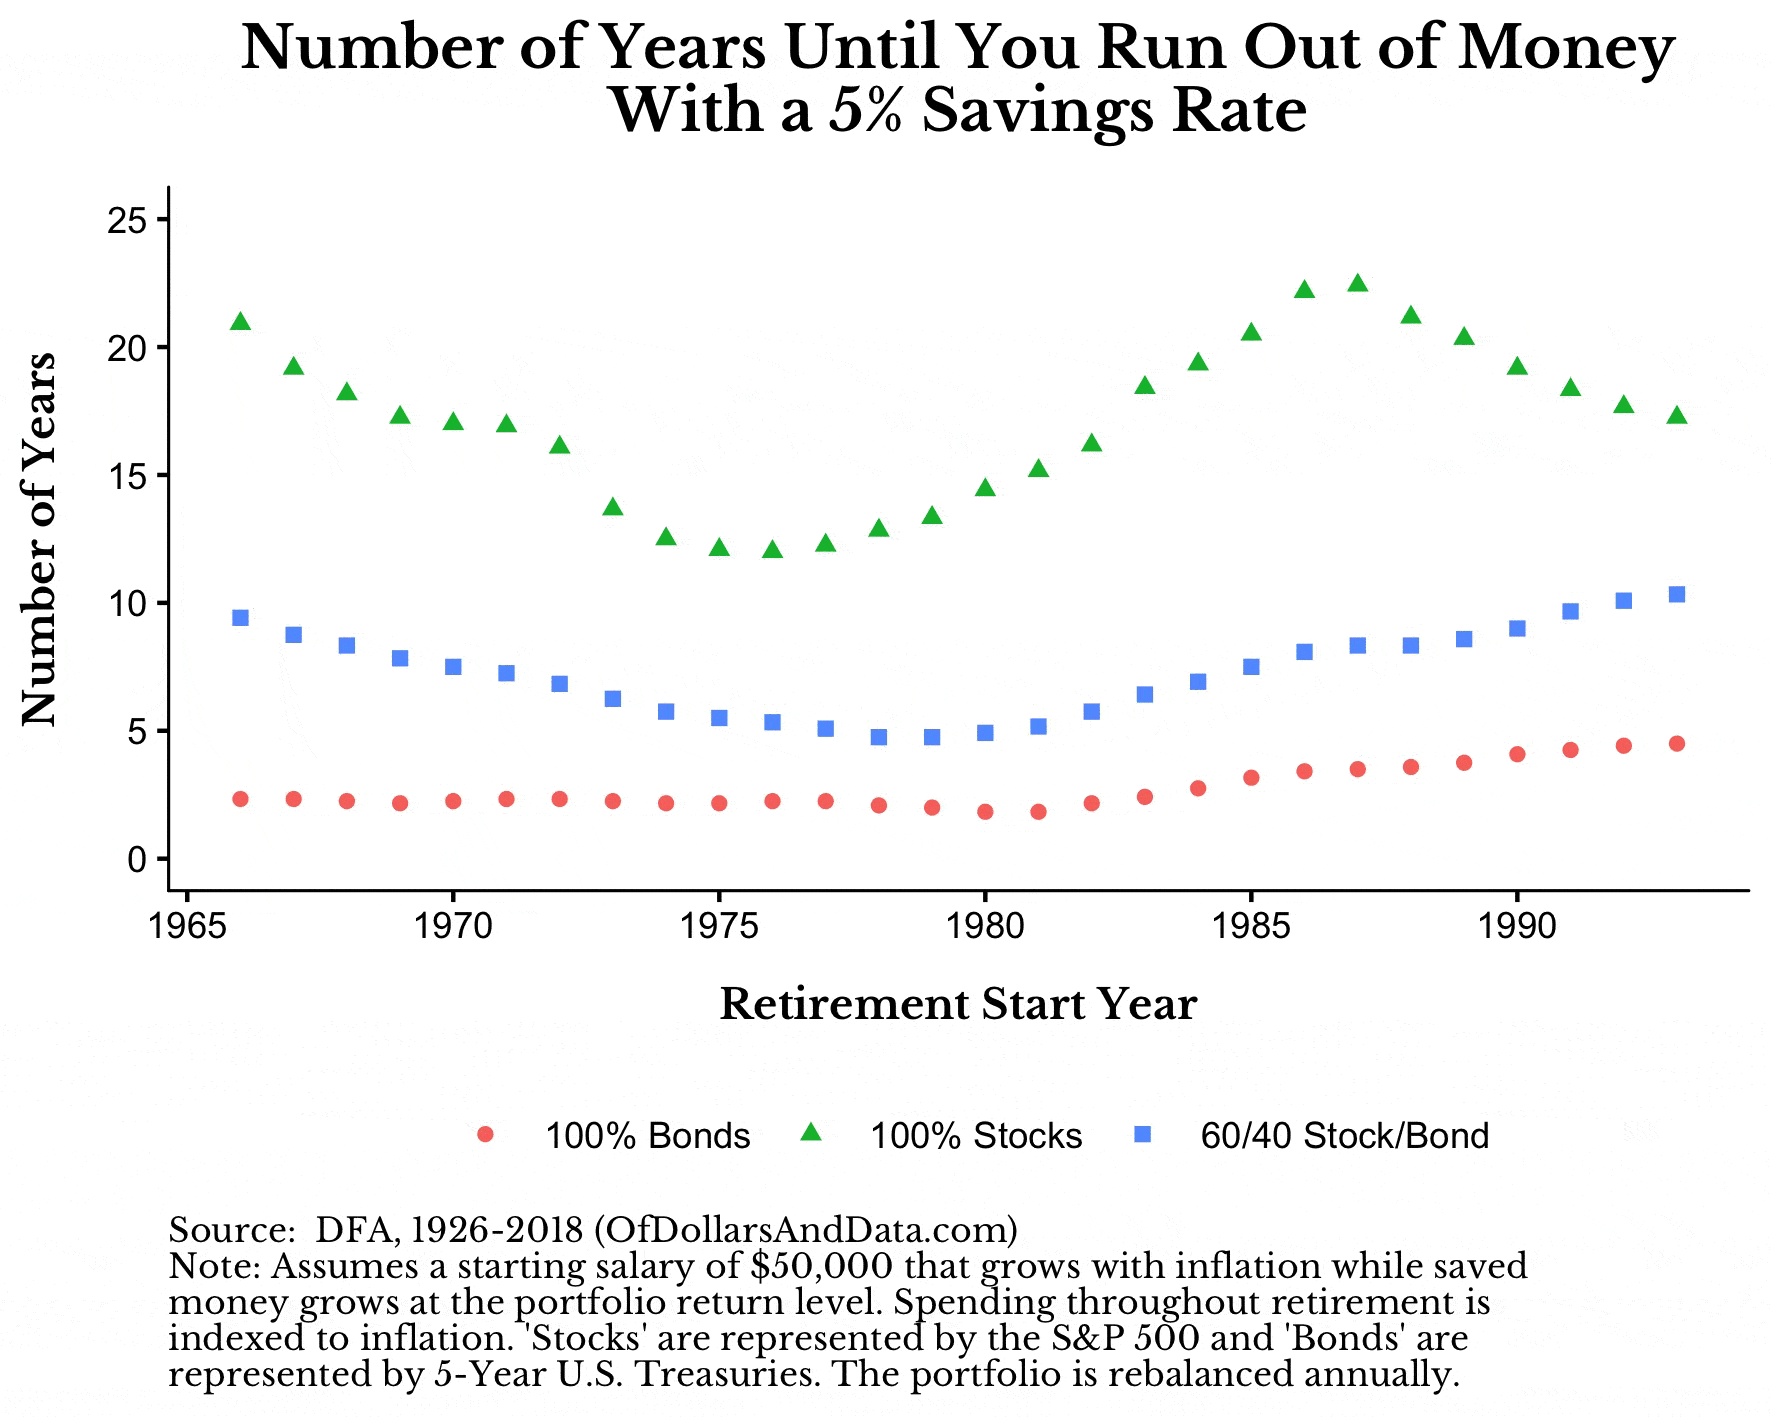 GIF of number of years until you run out of money simulation for different portfolio mixes and with different savings rates.